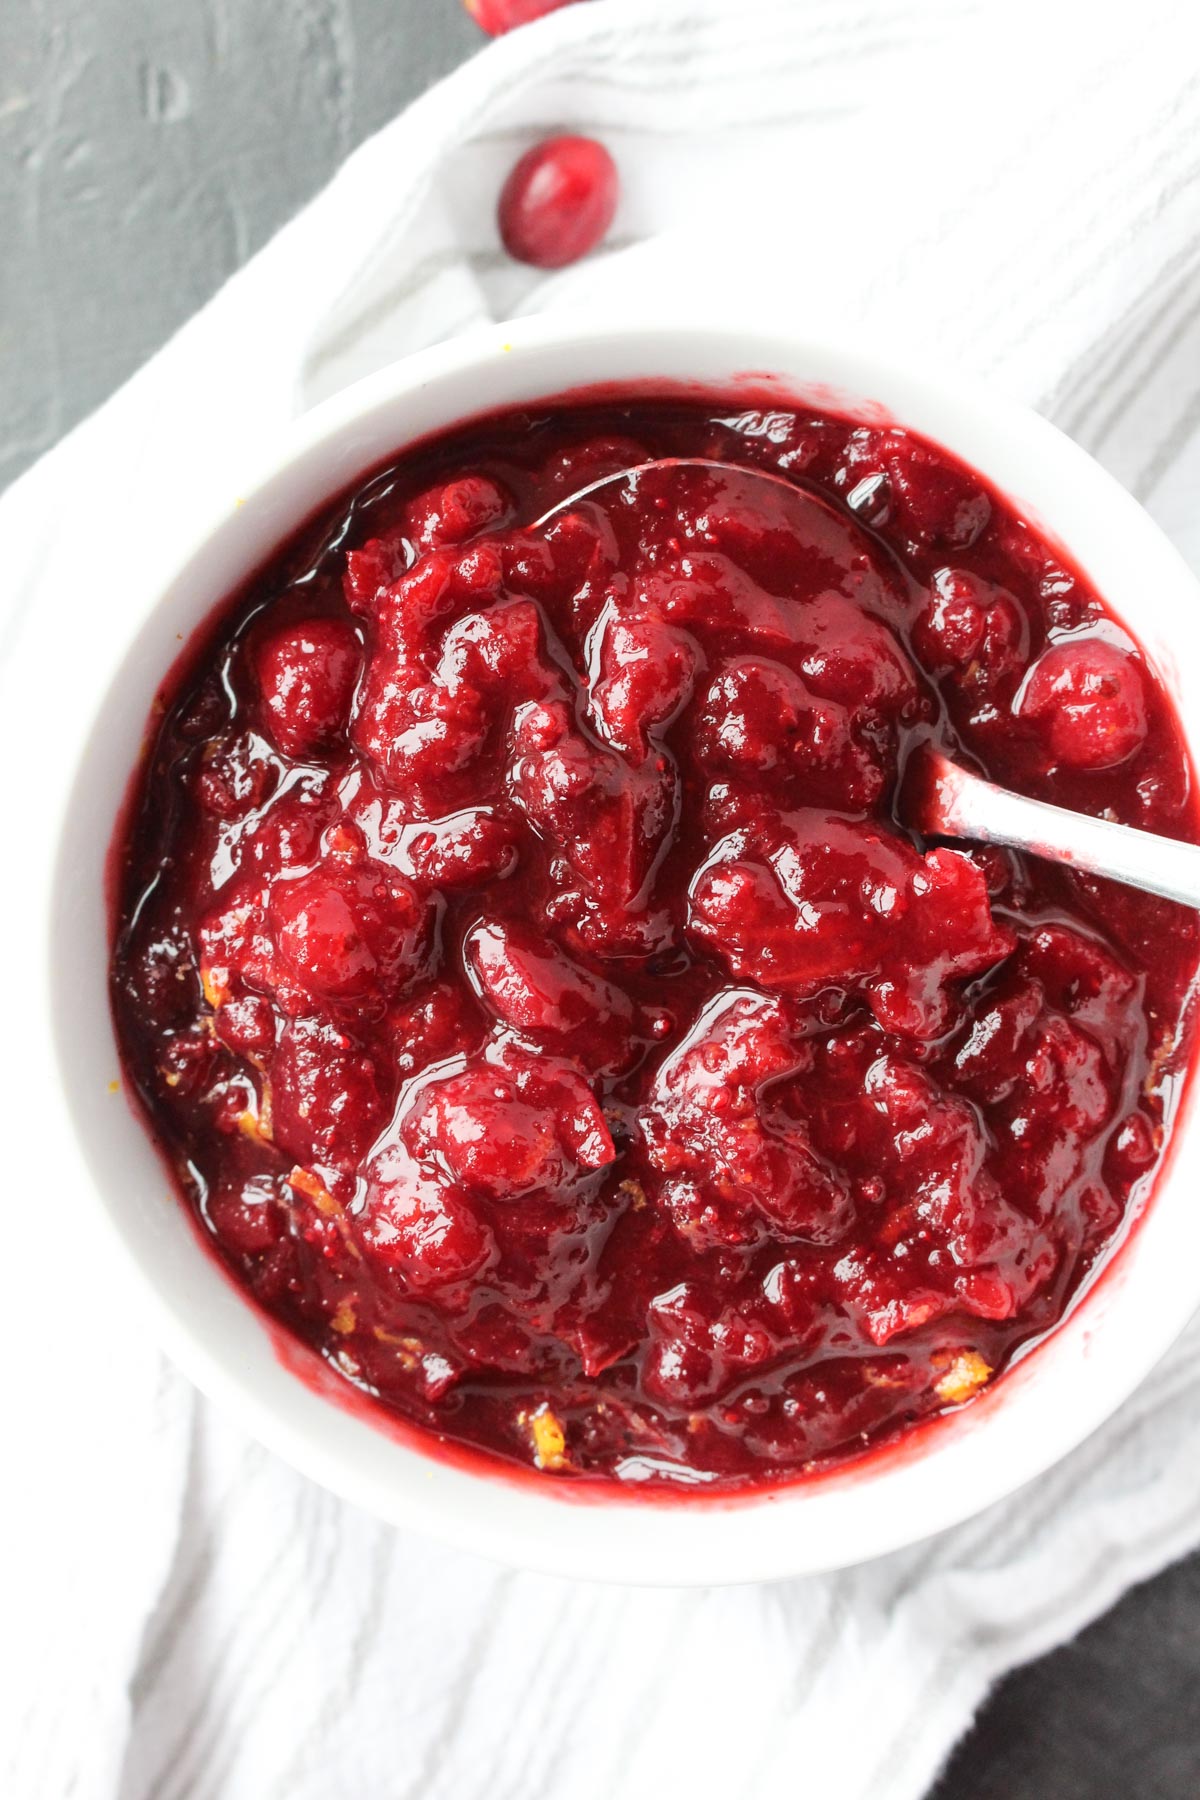 Overhead shot of cranberry sauce with serving spoon inside.